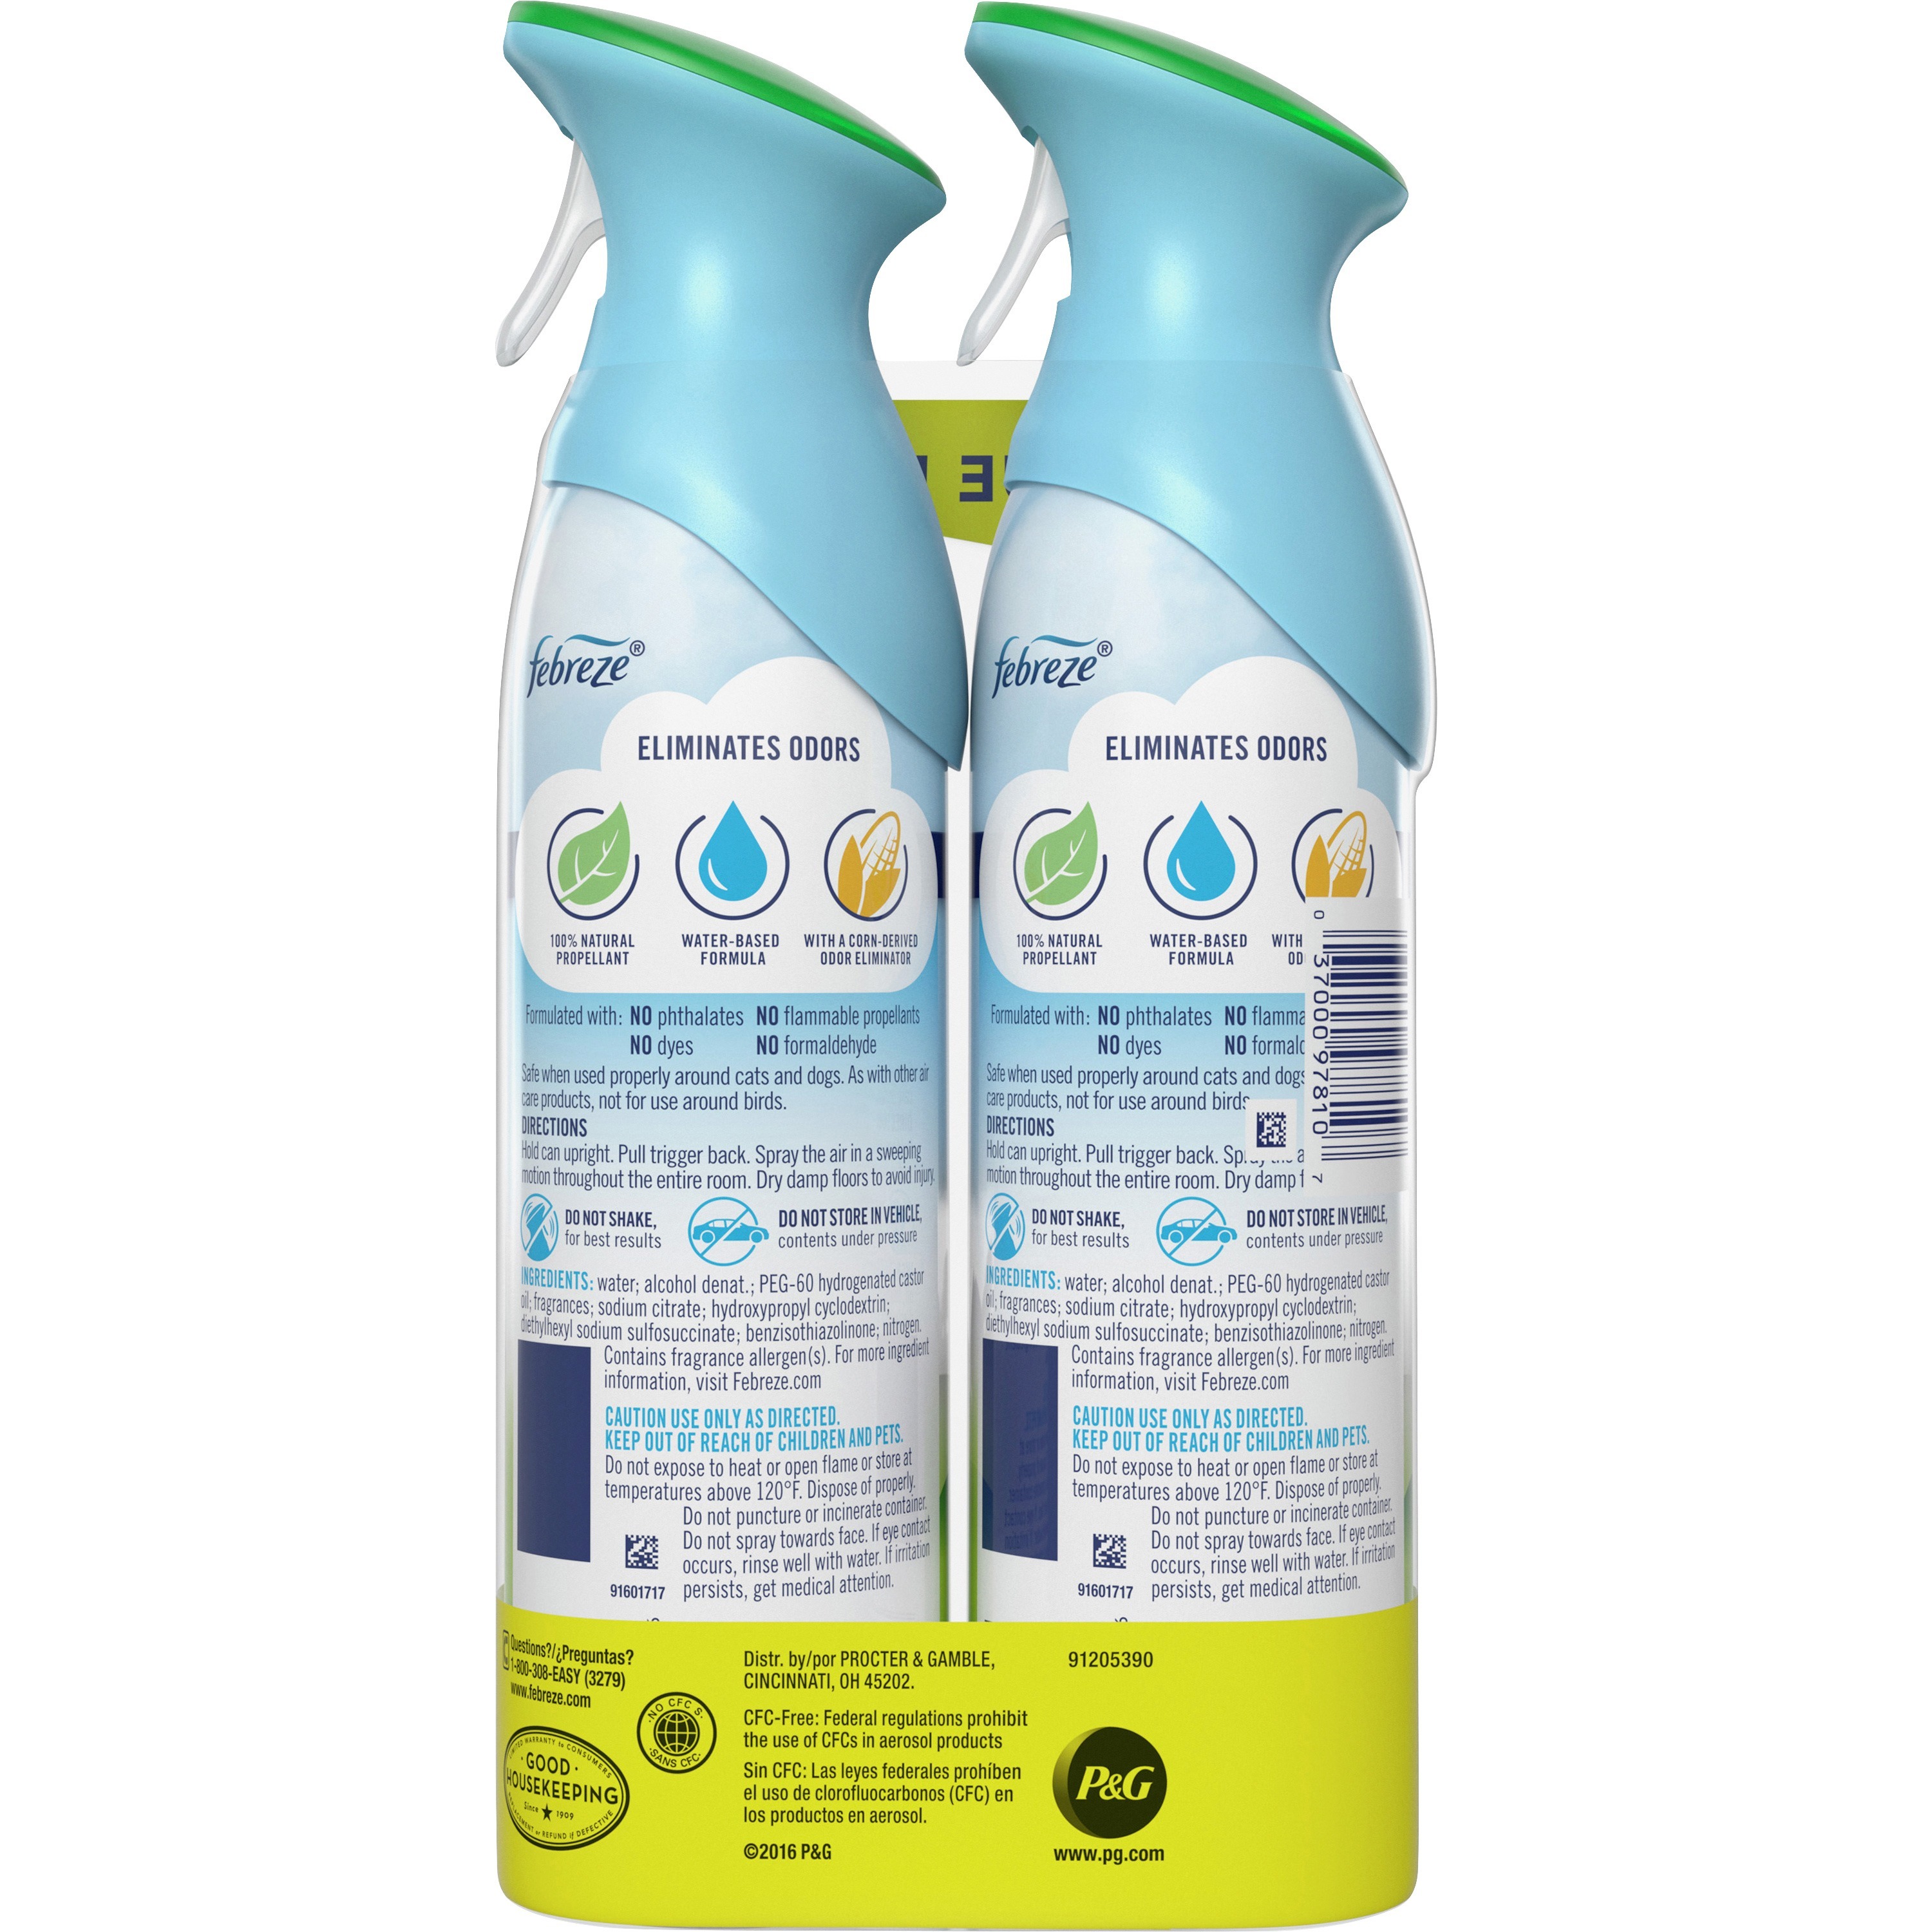 Is Febreze Safe to Use?